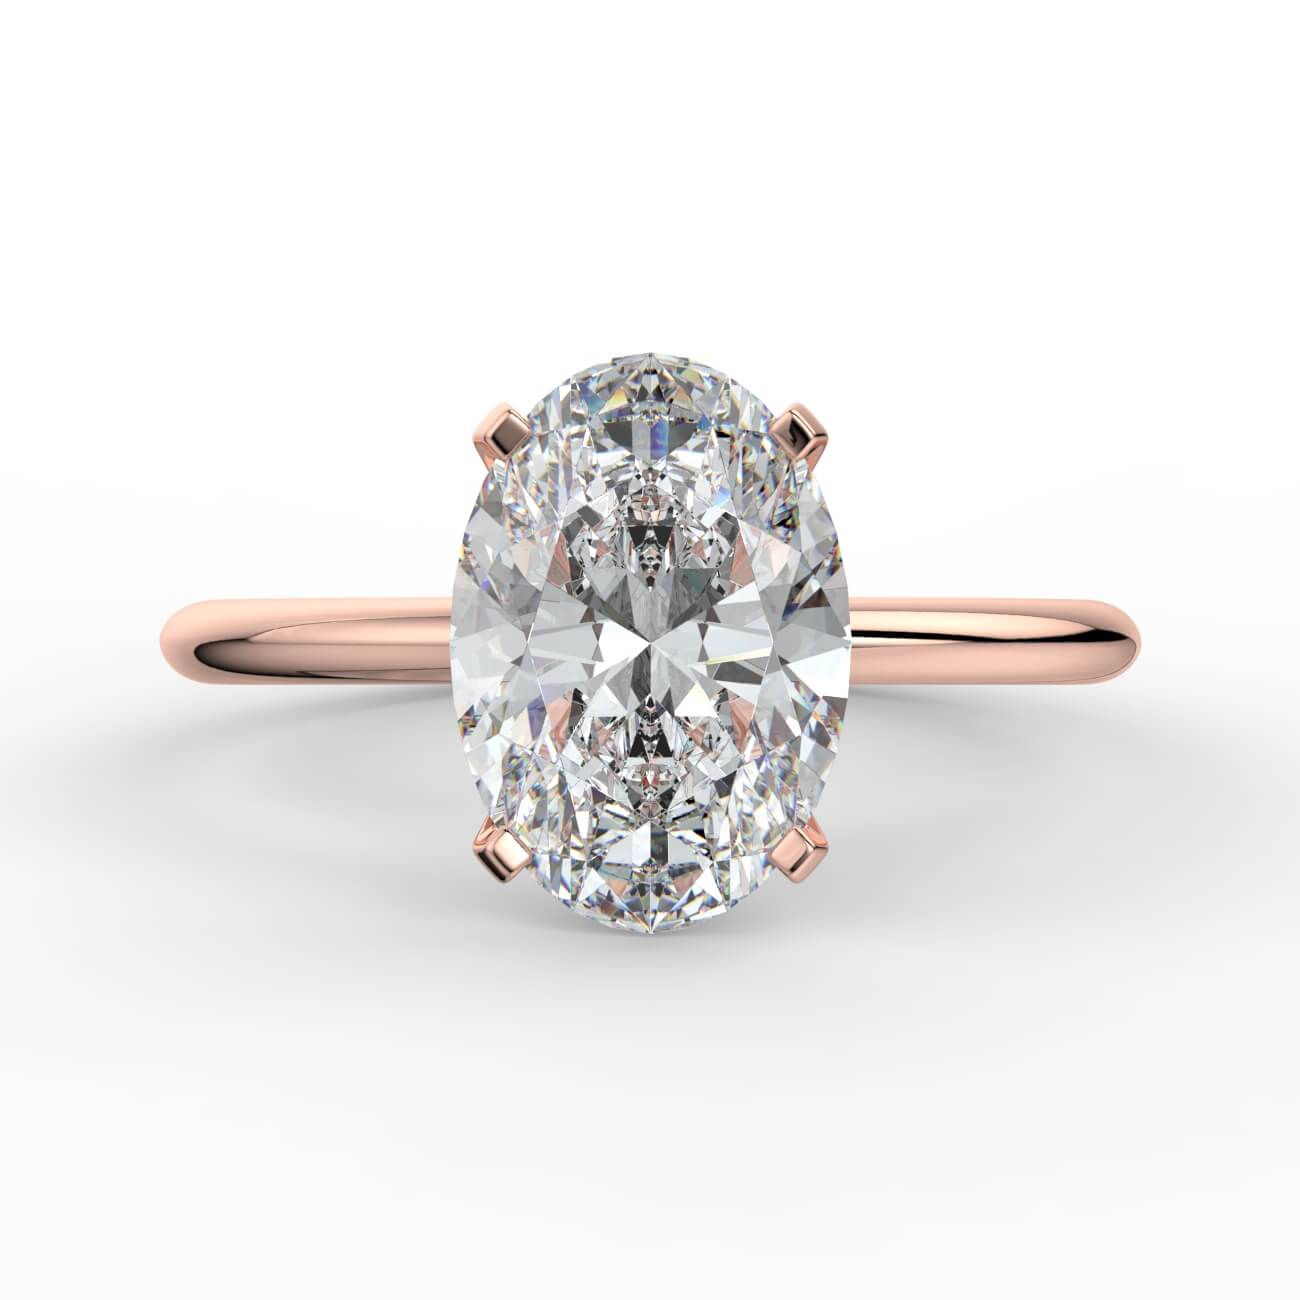 Tapering Solitaire Engagement Ring in rose gold – Australian Diamond Network